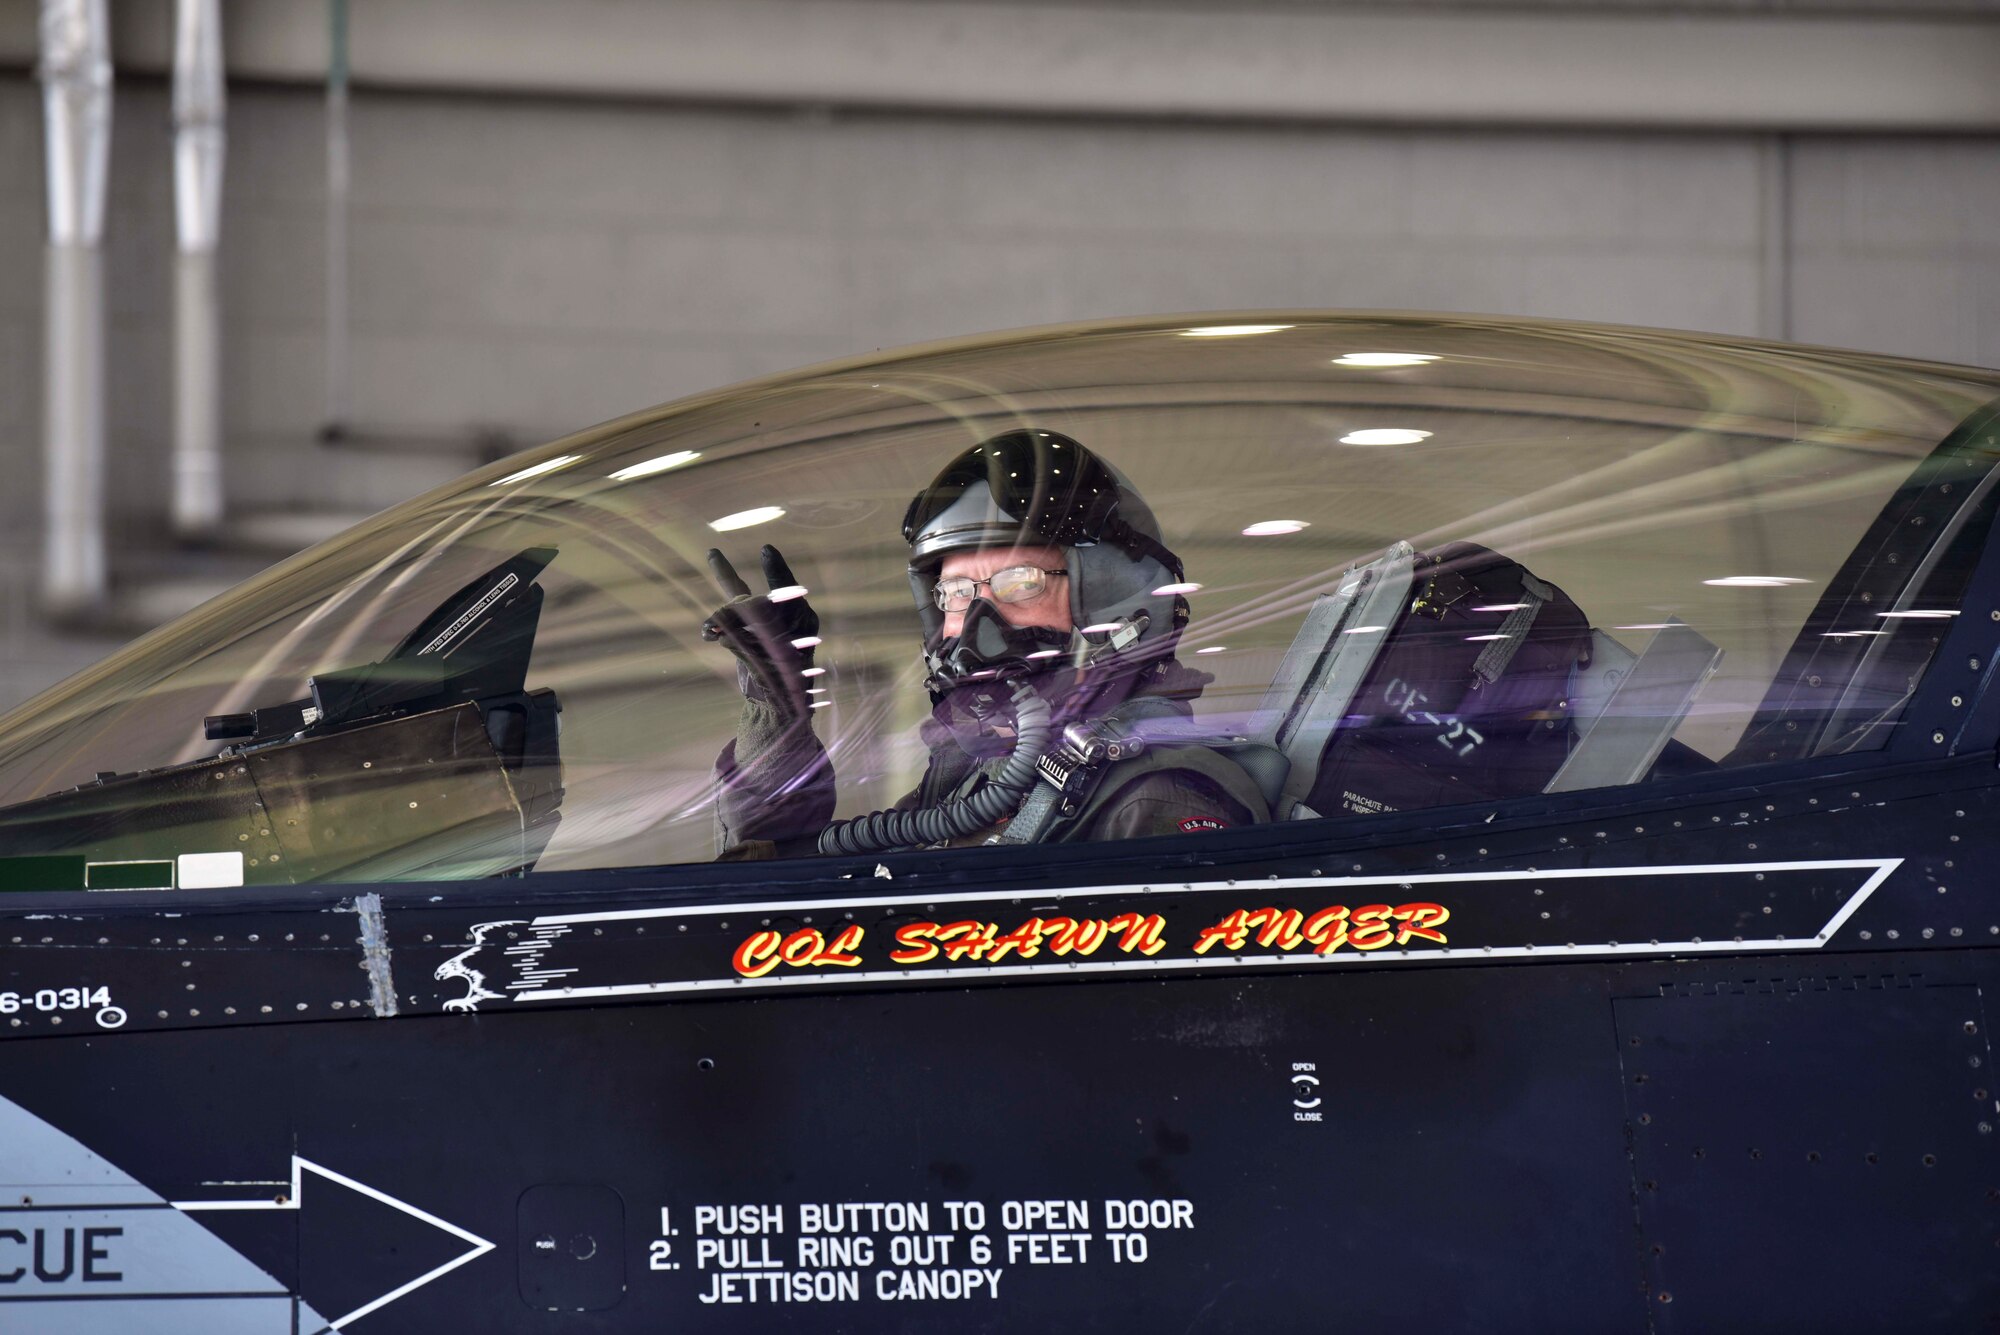 U.S. Air Force Col. Shawn E. Anger, the 354th Fighter Wing commander, renders the 18th Aggressor Squadron ‘have at you’ gesture during his fini flight at Eielson Air Force Base, Alaska, Aug. 13, 2020. Anger is a command pilot with more than 2,900 hours flight hours throughout his career. (U.S. Air Force photo by Senior Airman Beaux Hebert)